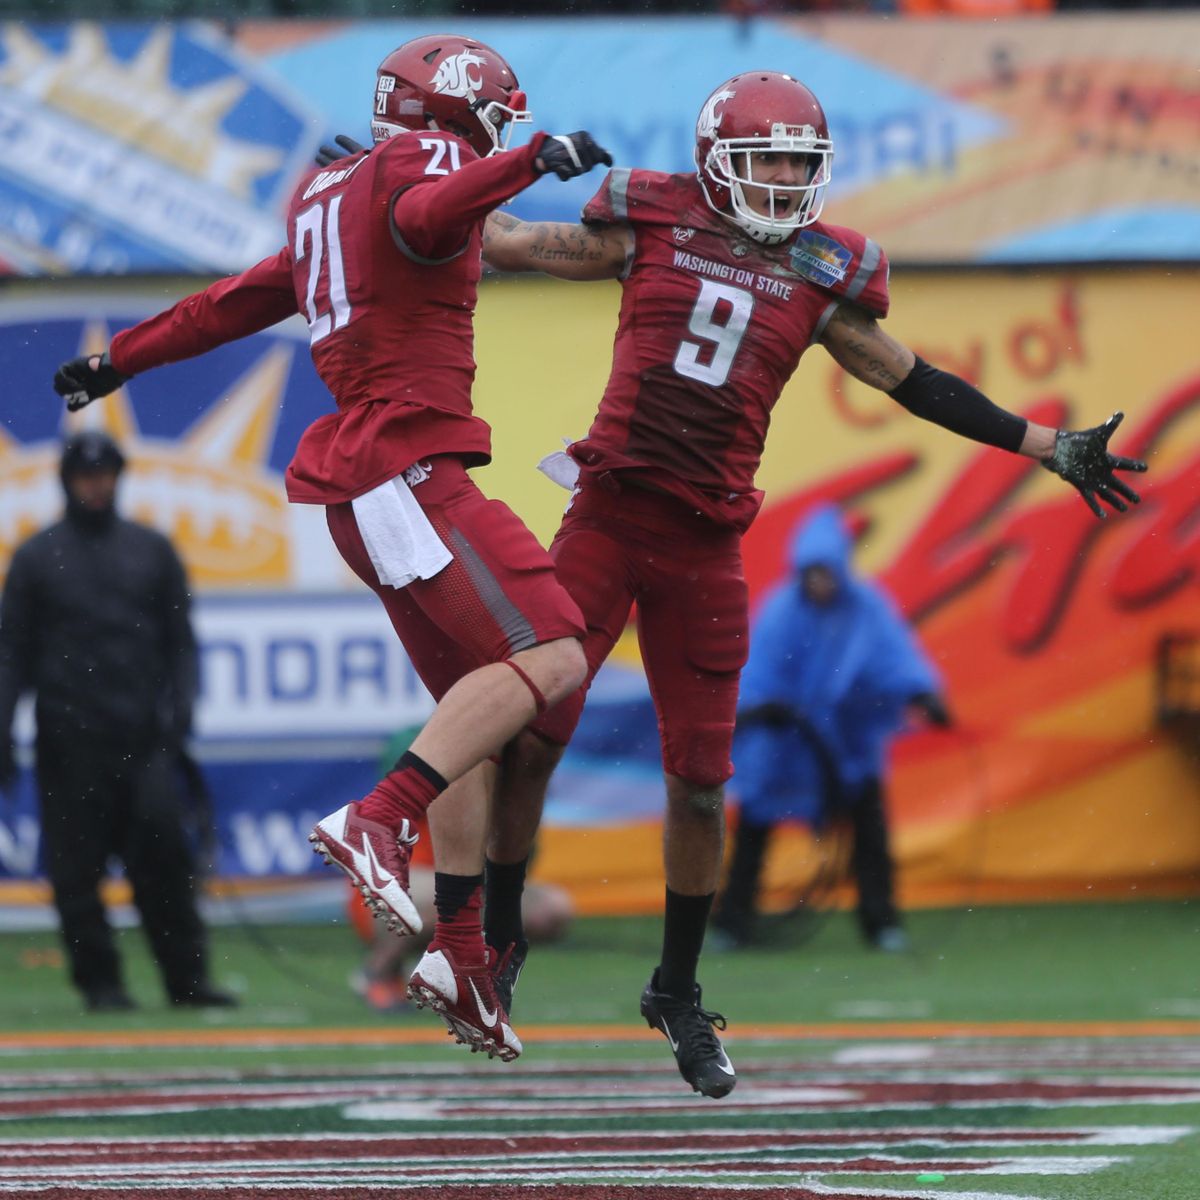 Washington State receiver Gabe Marks, right, celebrates with teammate River Cracraft after scoring a touchdown during the first half of the Sun Bowl NCAA college football game against Miami, Saturday Dec. 26, 2015 in El Paso, Texas. (Victor Calzada / AP)